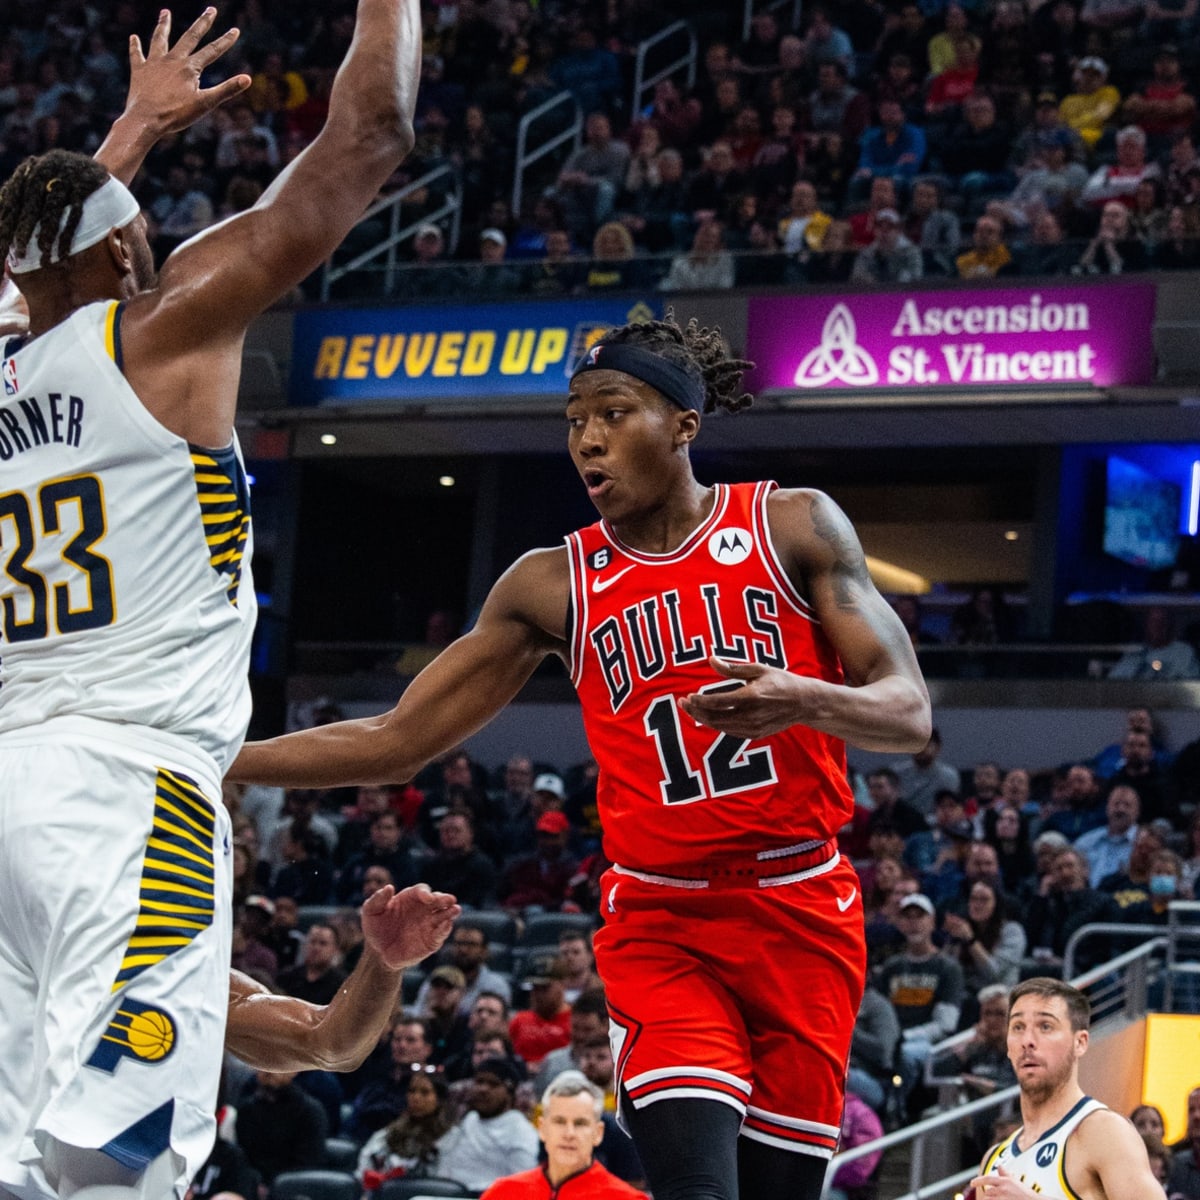 Bulls guard Dosunmu added as injury replacement for Rising Stars games